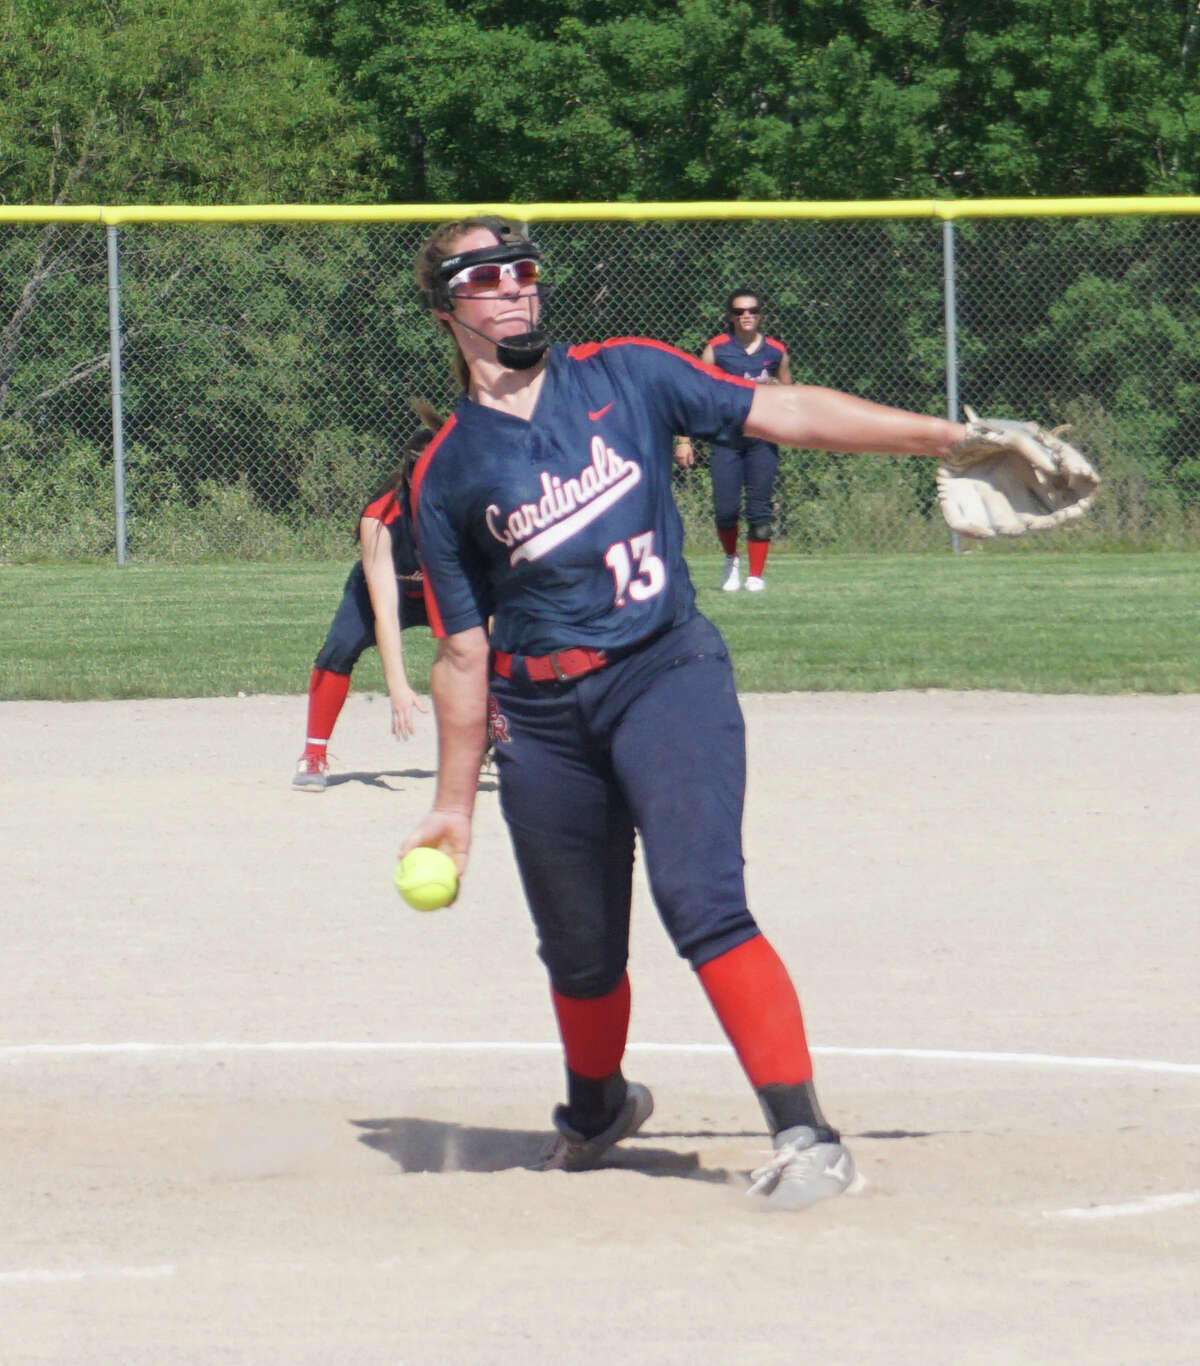 The Big Rapids softball team was defeated 8-2 by Traverse City West on Wednesday afternoon.